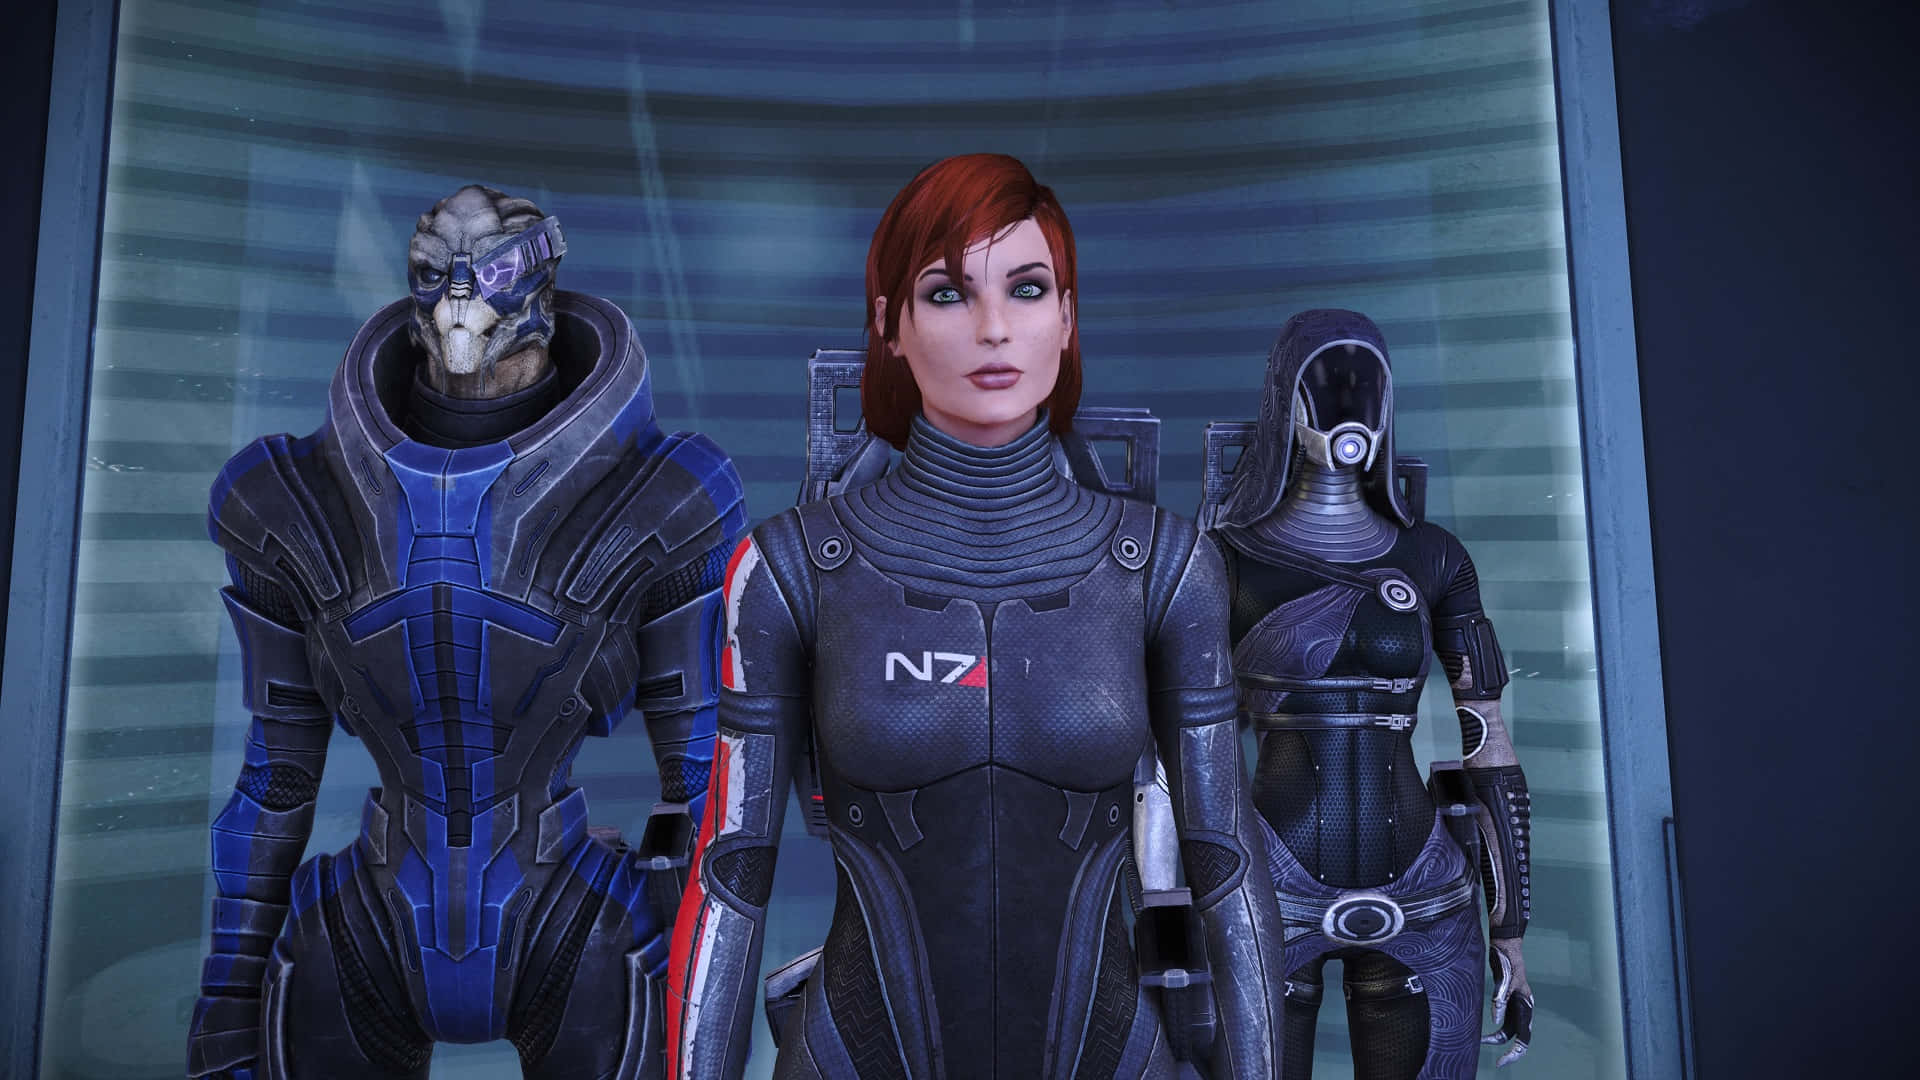 Commander Shepard faces the Galaxy in Mass Effect Legendary Edition Wallpaper